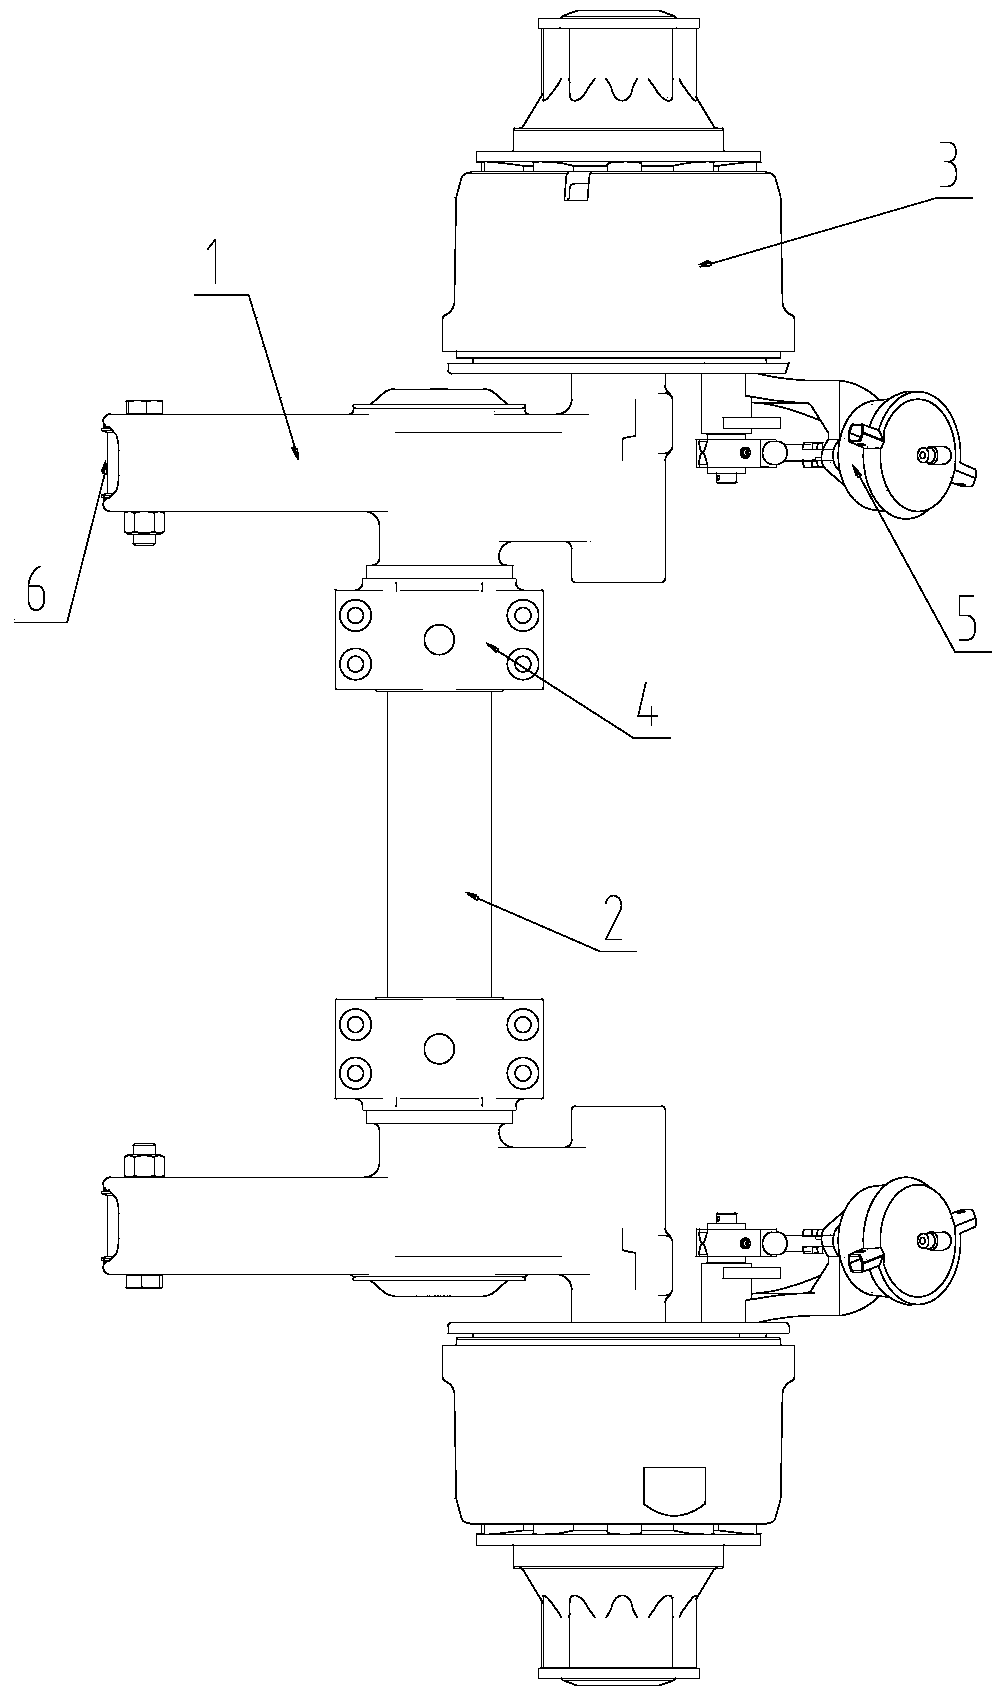 A suspension system and vehicle axle